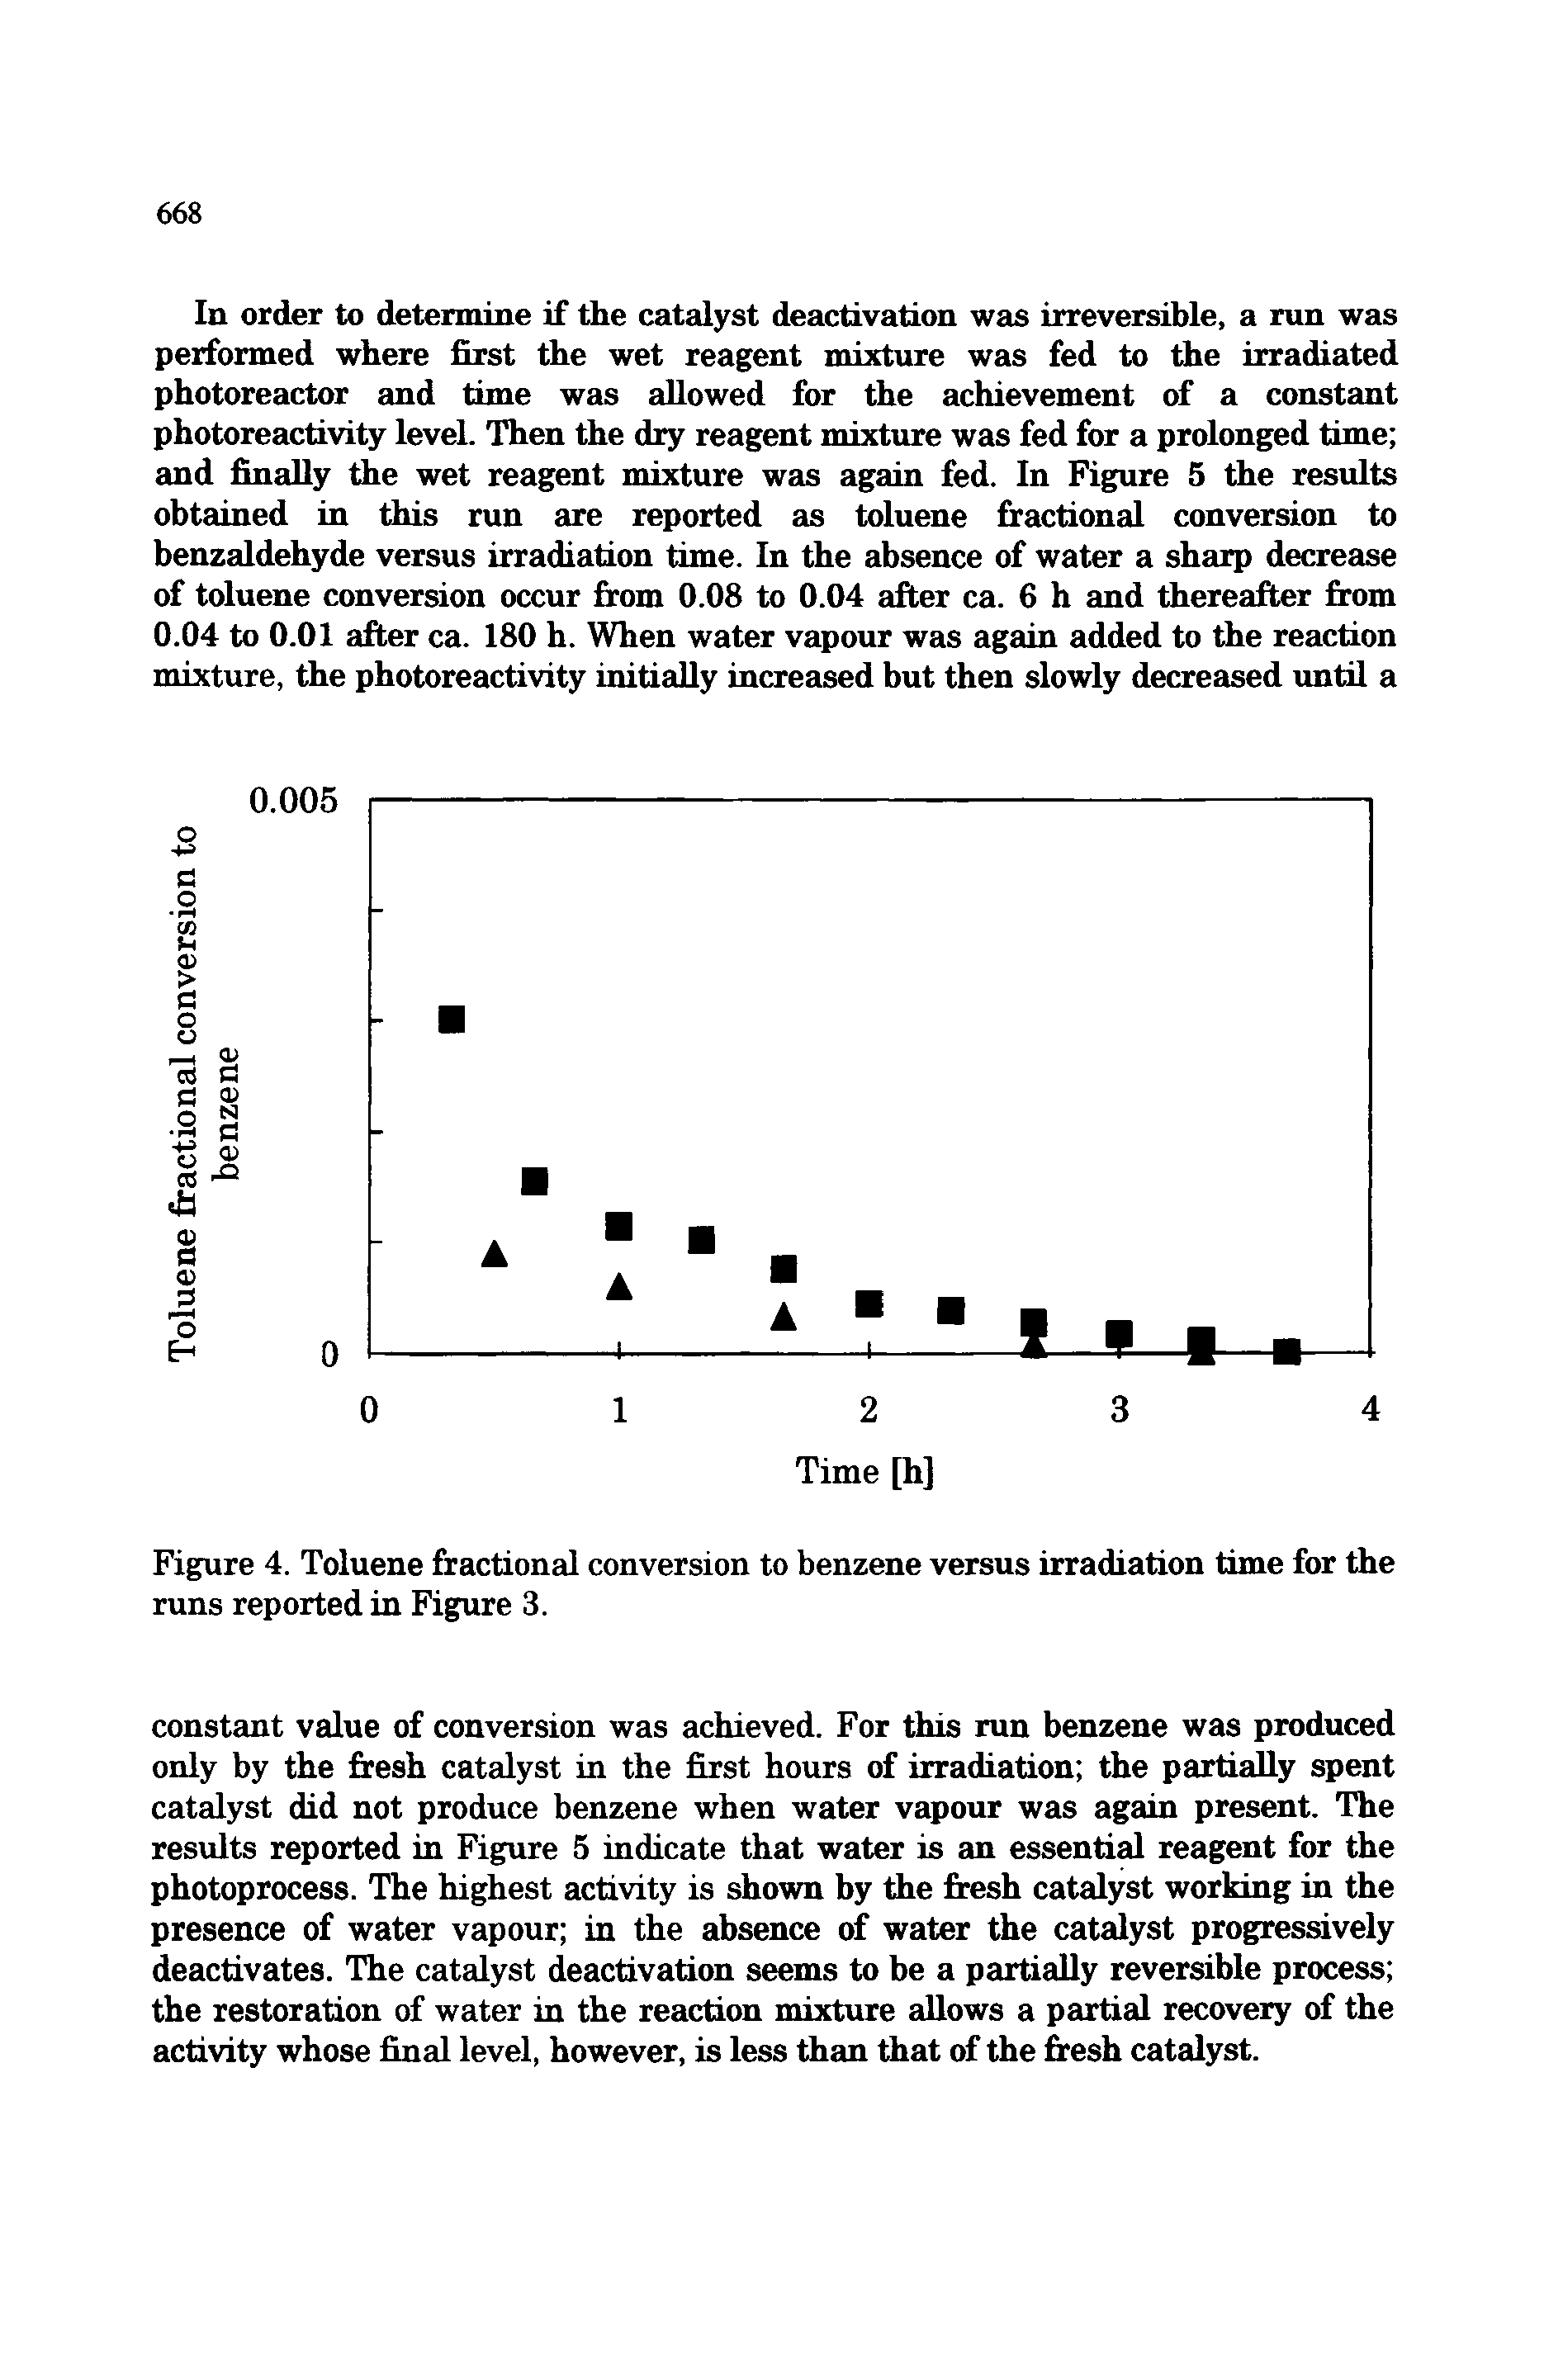 Figure 4. Toluene fractional conversion to benzene versus irradiation time for the runs reported in Figure 3.